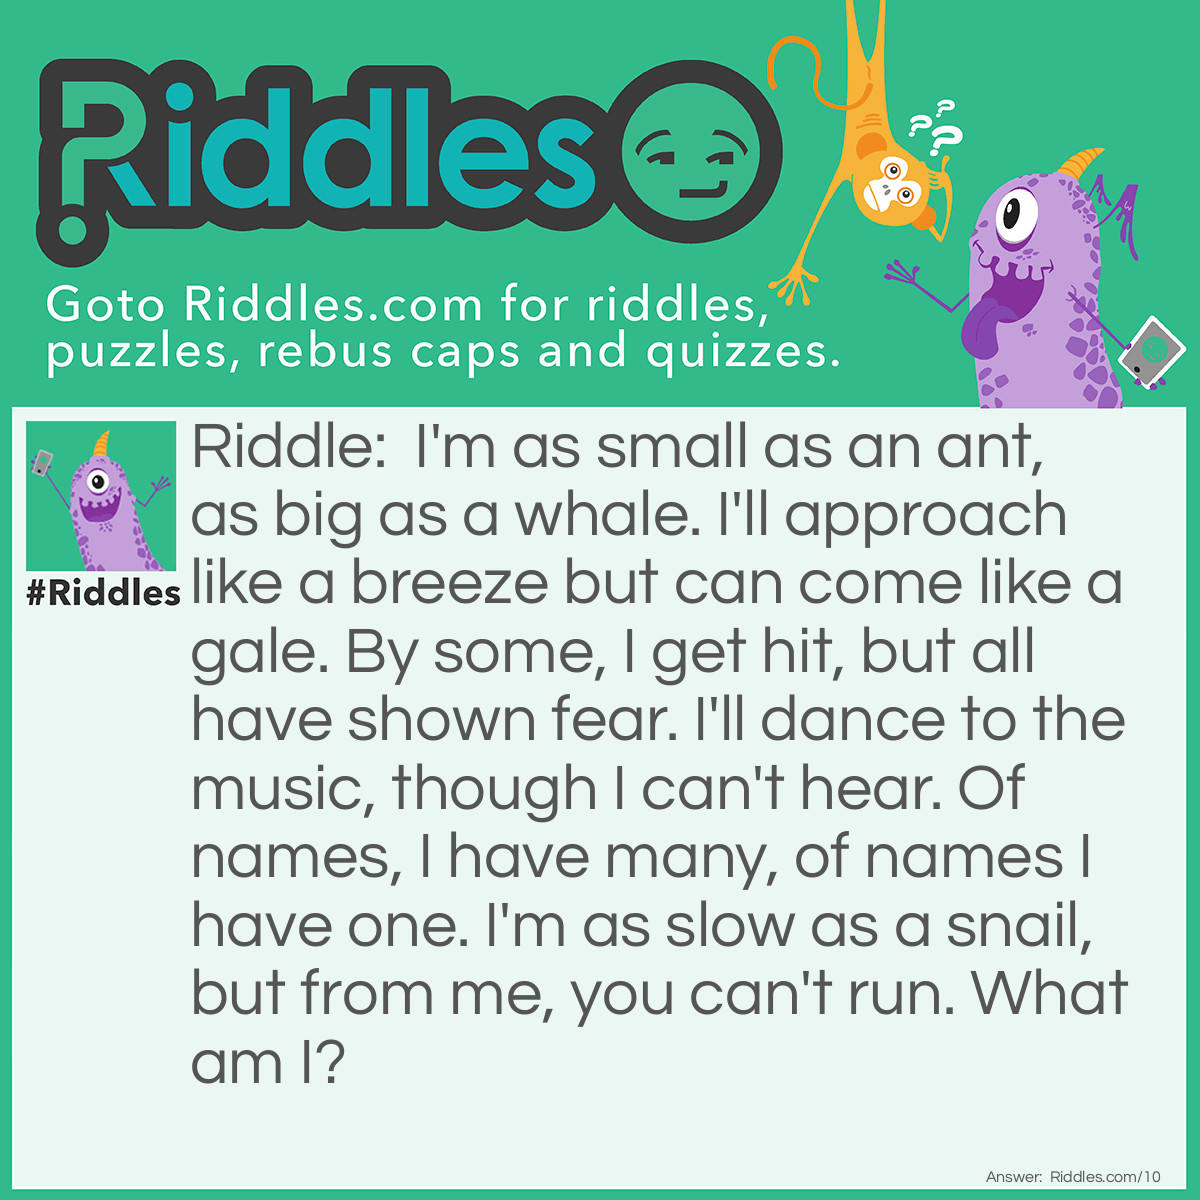 Riddle: I'm as small as an ant, as big as a whale. I'll approach like a breeze but can come like a gale. By some, I get hit, but all have shown fear. I'll dance to the music, though I can't hear. Of names, I have many, of names I have one. I'm as slow as a snail, but from me, you can't run. What am I? Answer: I am a shadow.